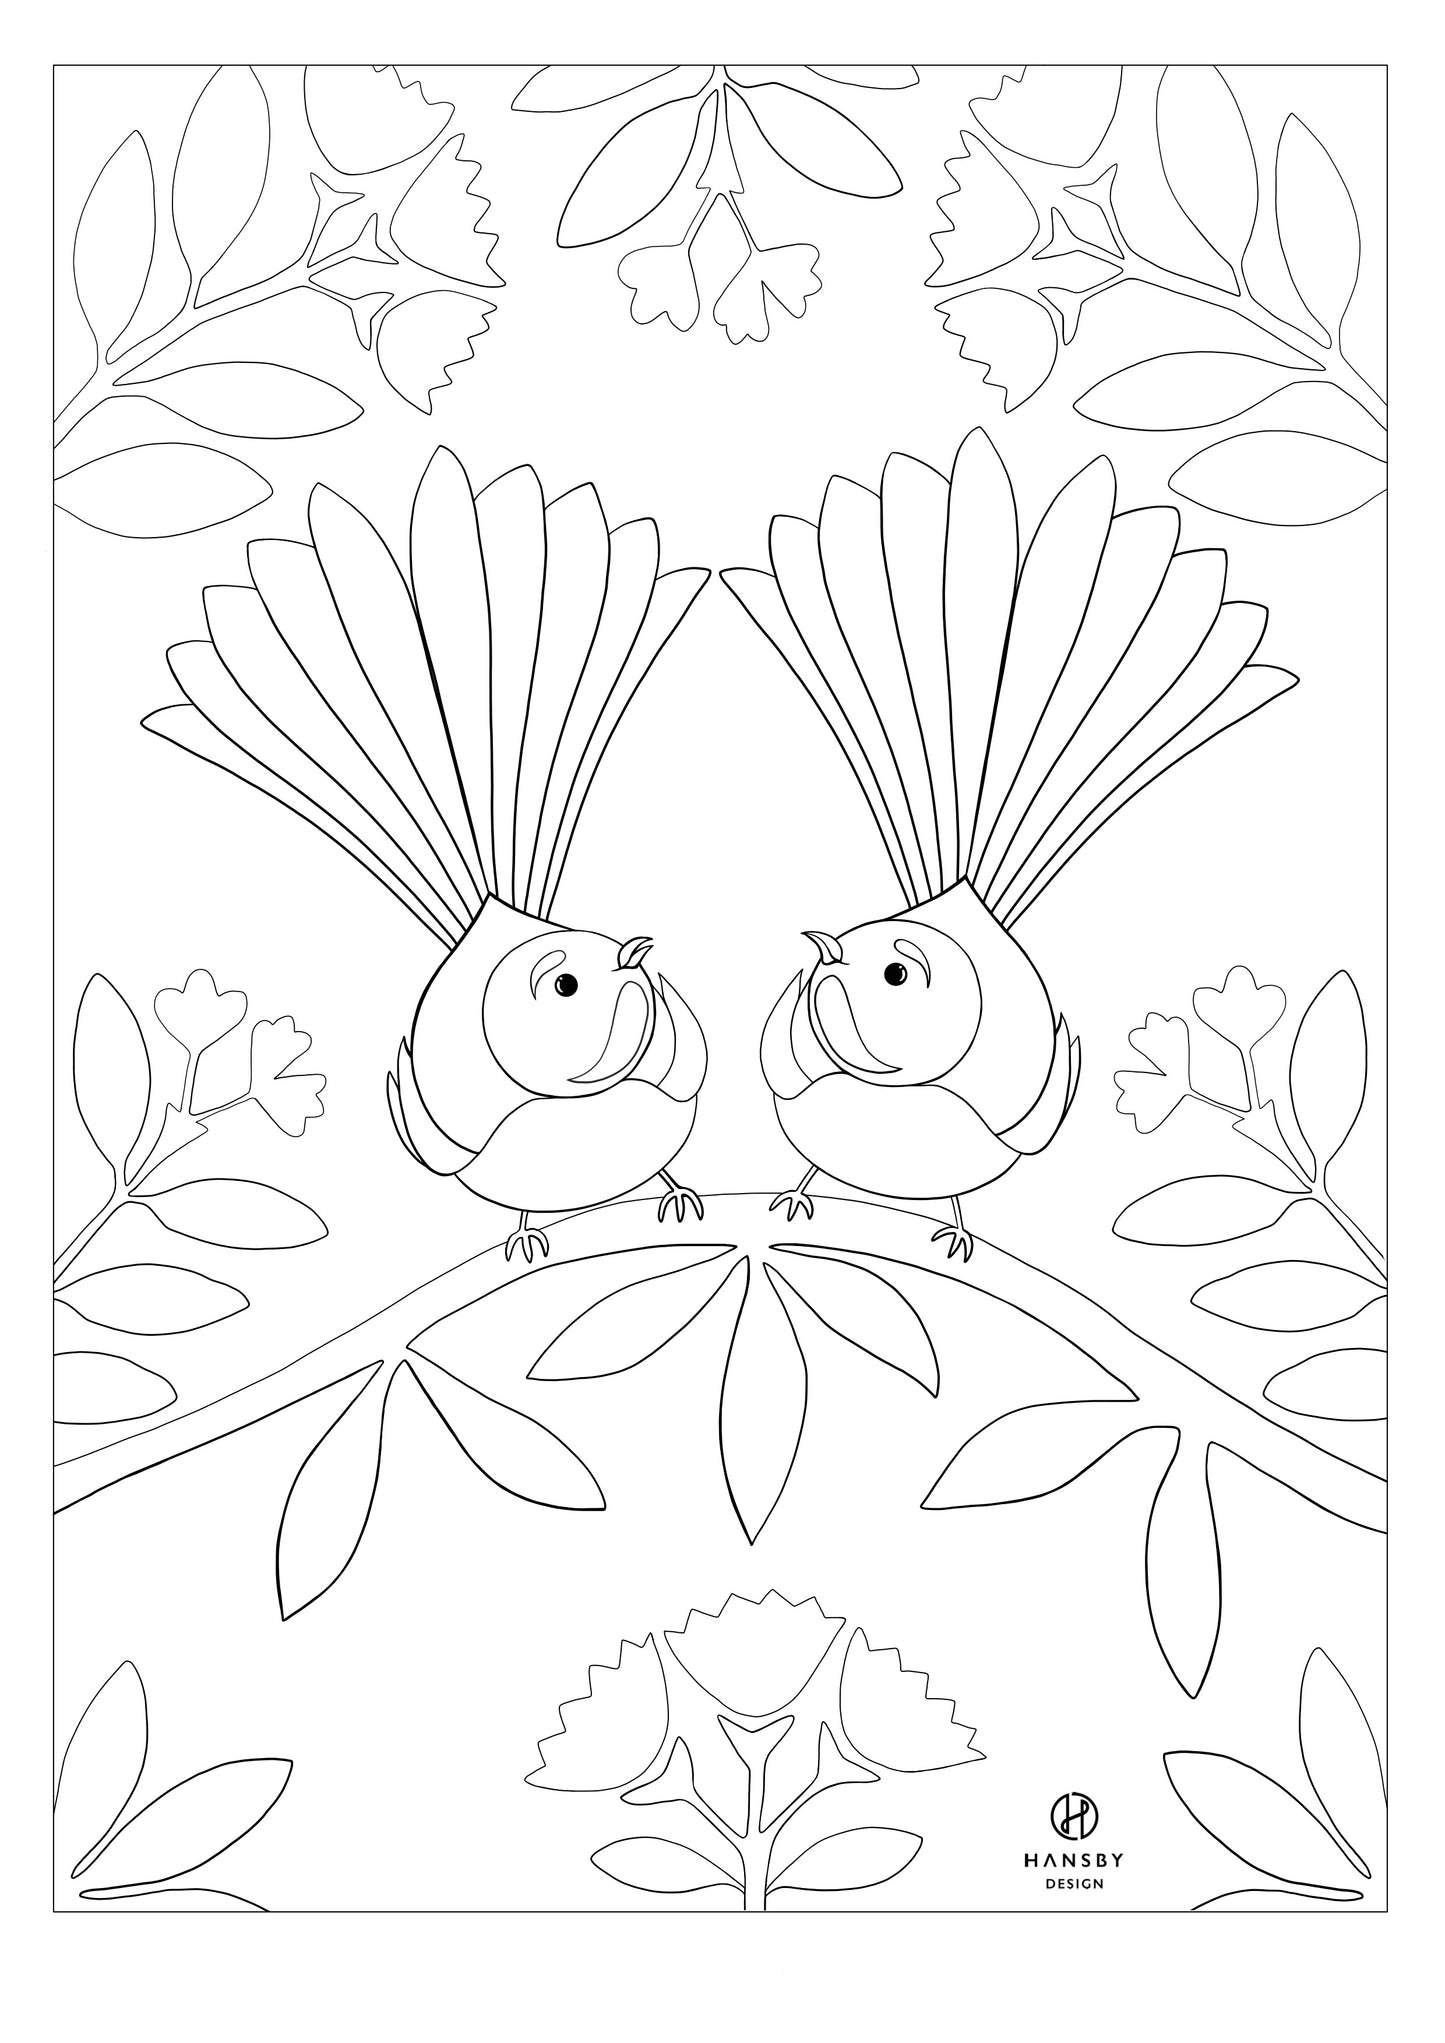 Fantail Colouring printable art print by New Zealand artist Hansby Design	